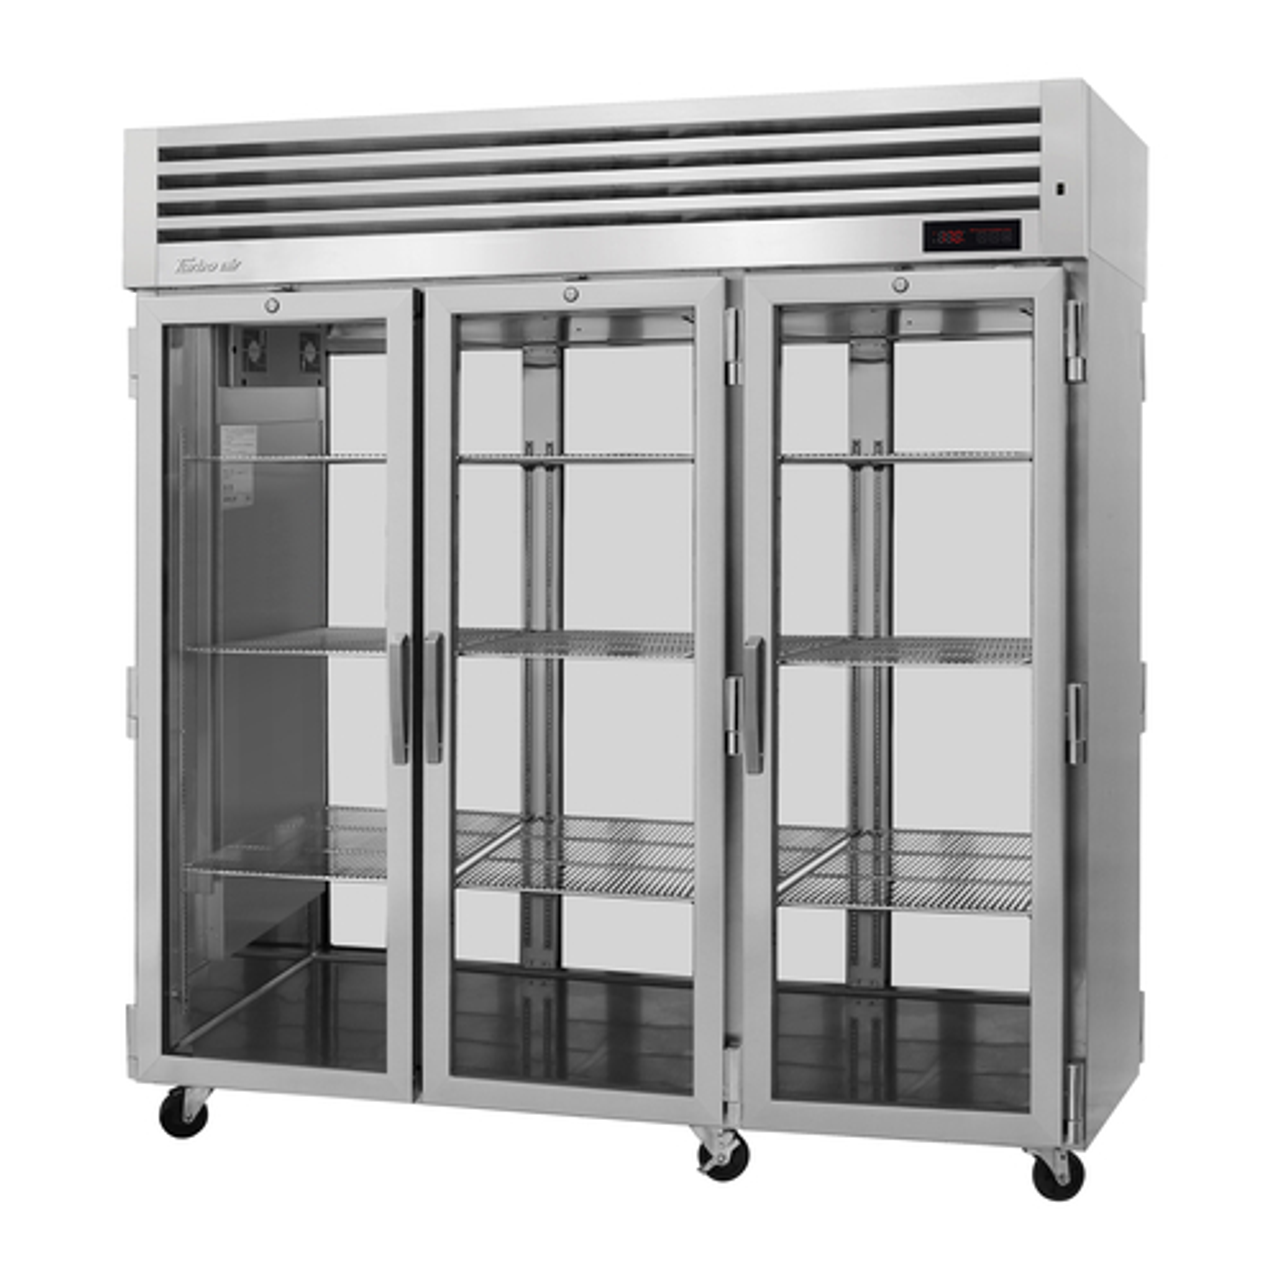 Turbo Air PRO-77H-G-PT 3 Section Pass-Thru Heated Cabinet- PRO Series